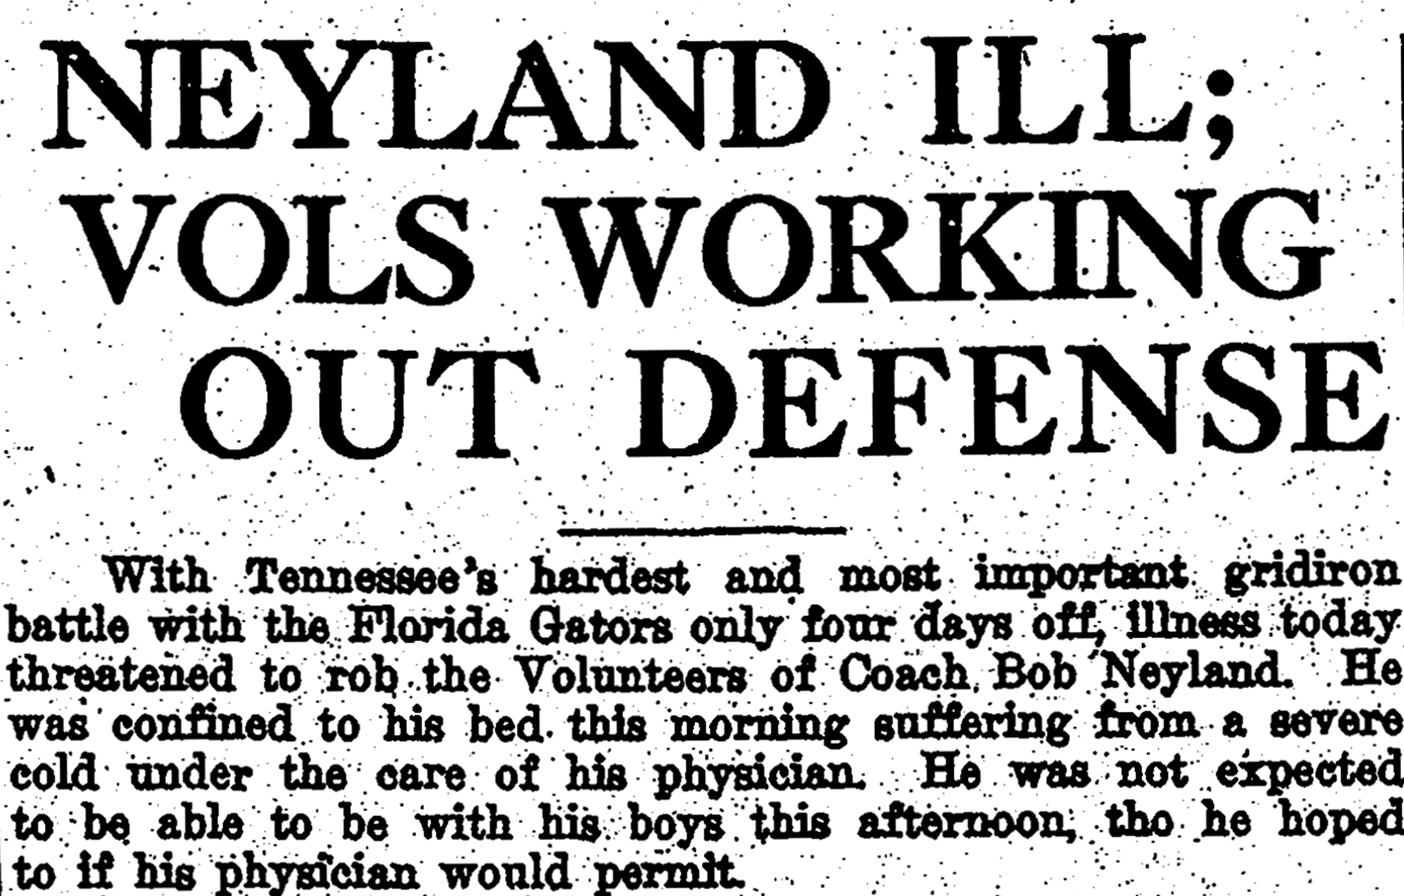 Knoxville News-Sentinel (Published as The Knoxville News-Sentinel) - December 4, 1928